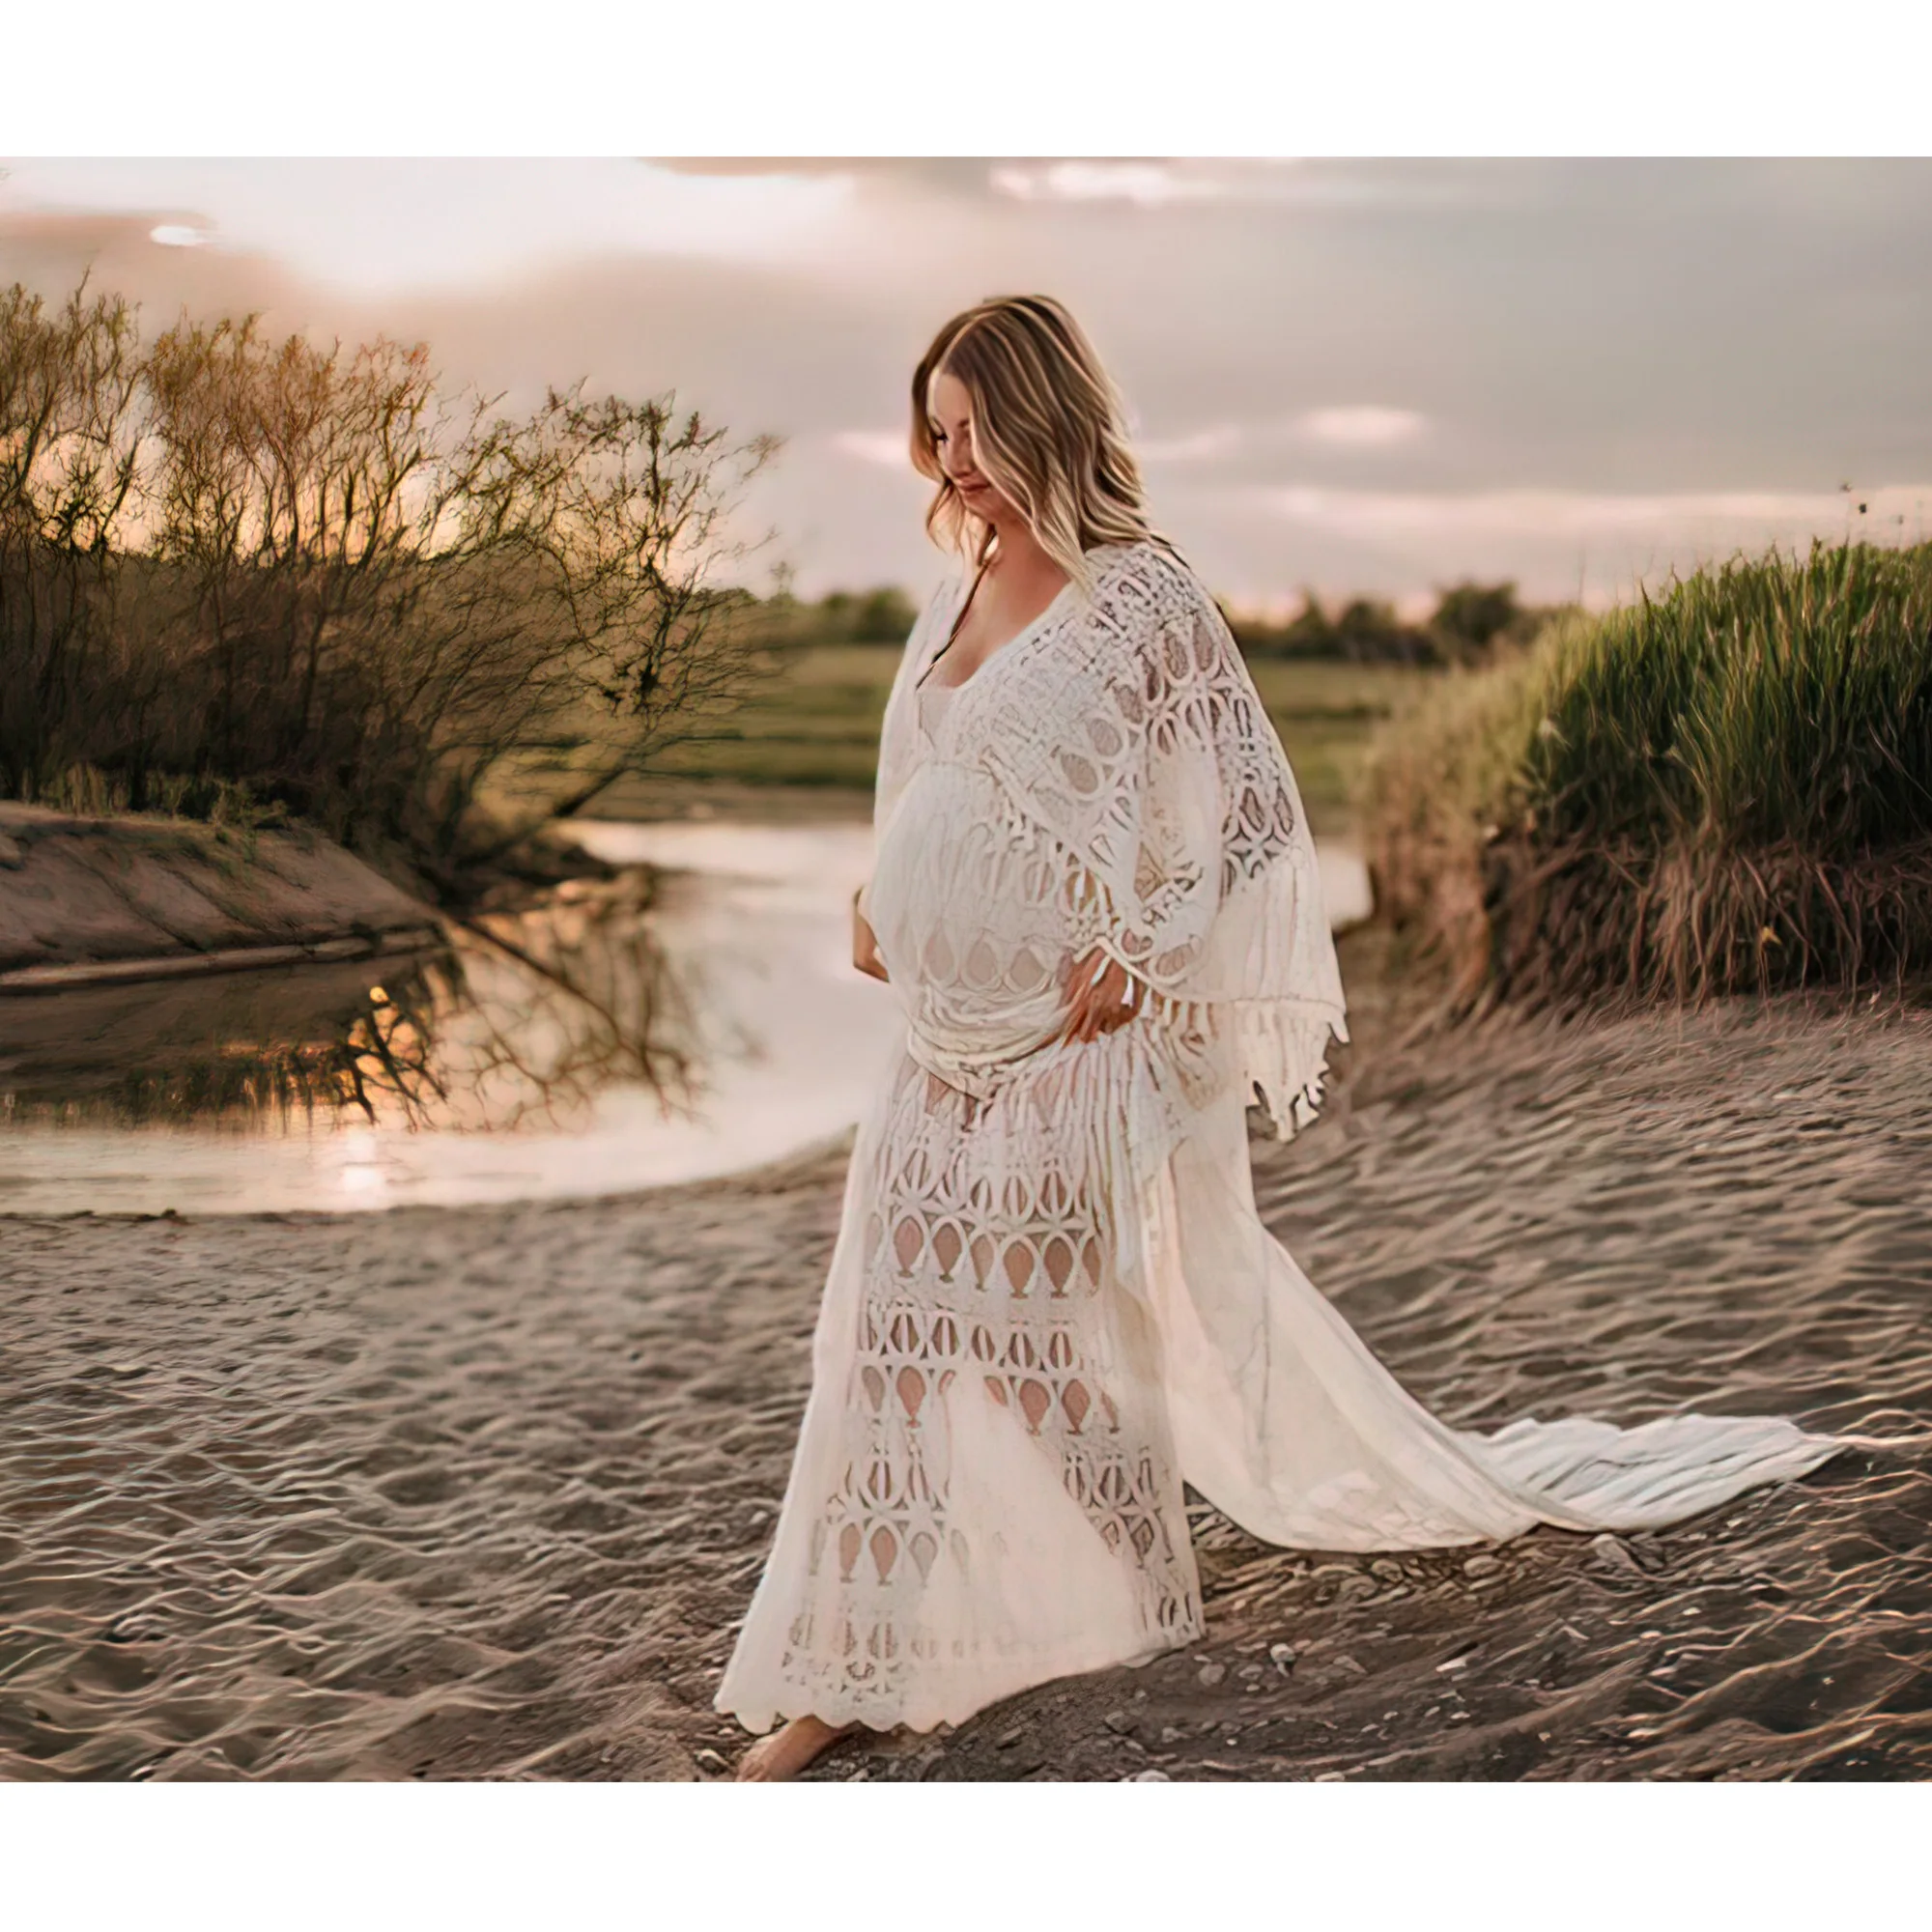 Don&Judy Women Maternity Dress Photography Props Gown Shoot Baby Shower Long Sleeve V Neck  Pregnancy Dress For Photo Shoot 2021 enlarge